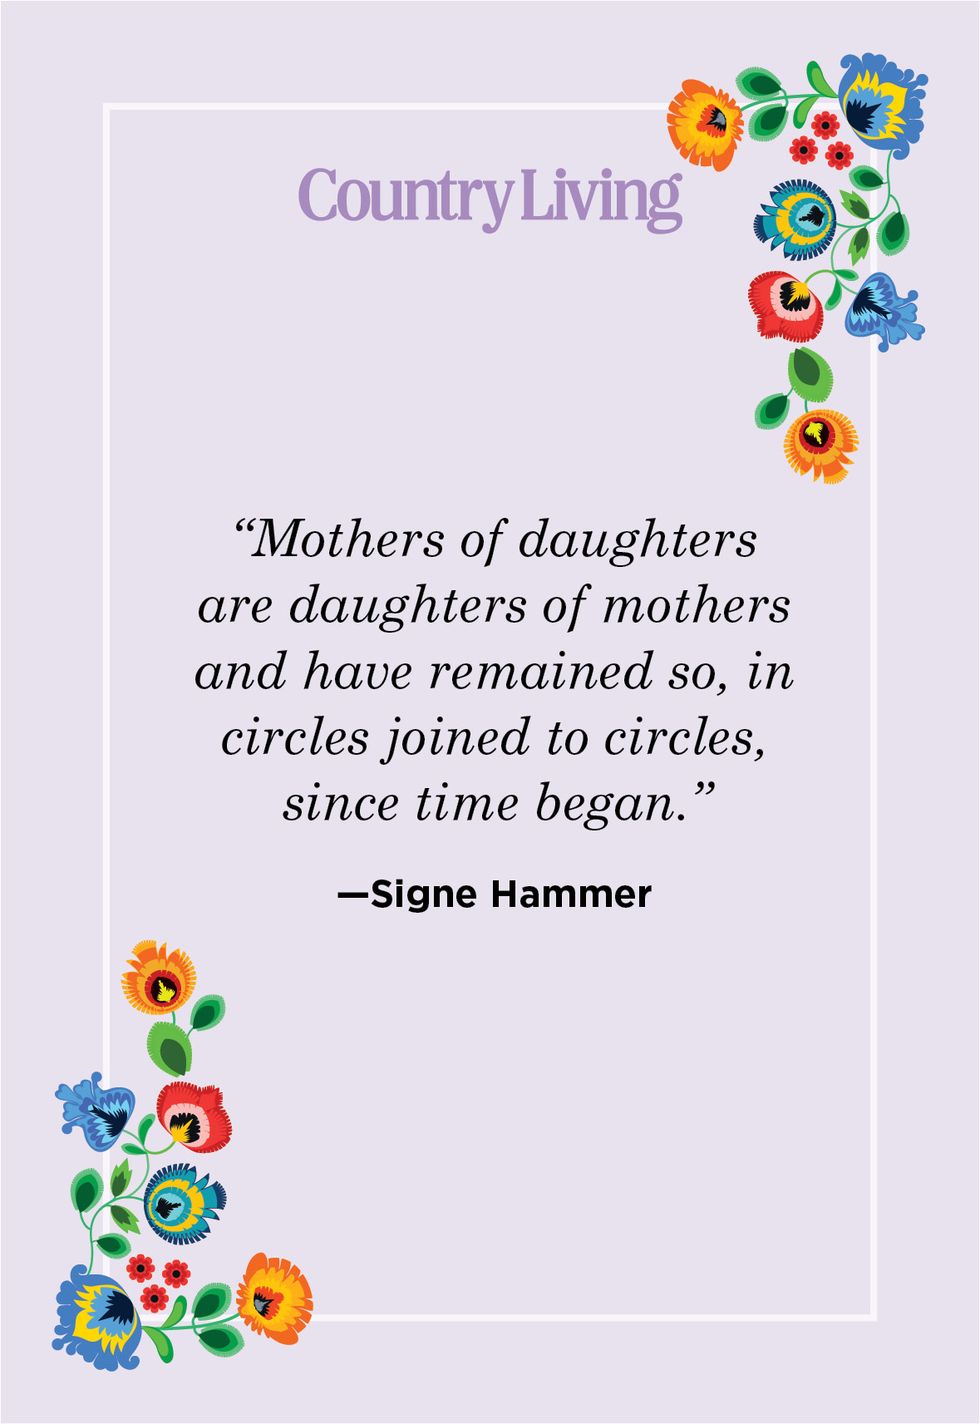 mother daughter quote for instagram by signe hammer